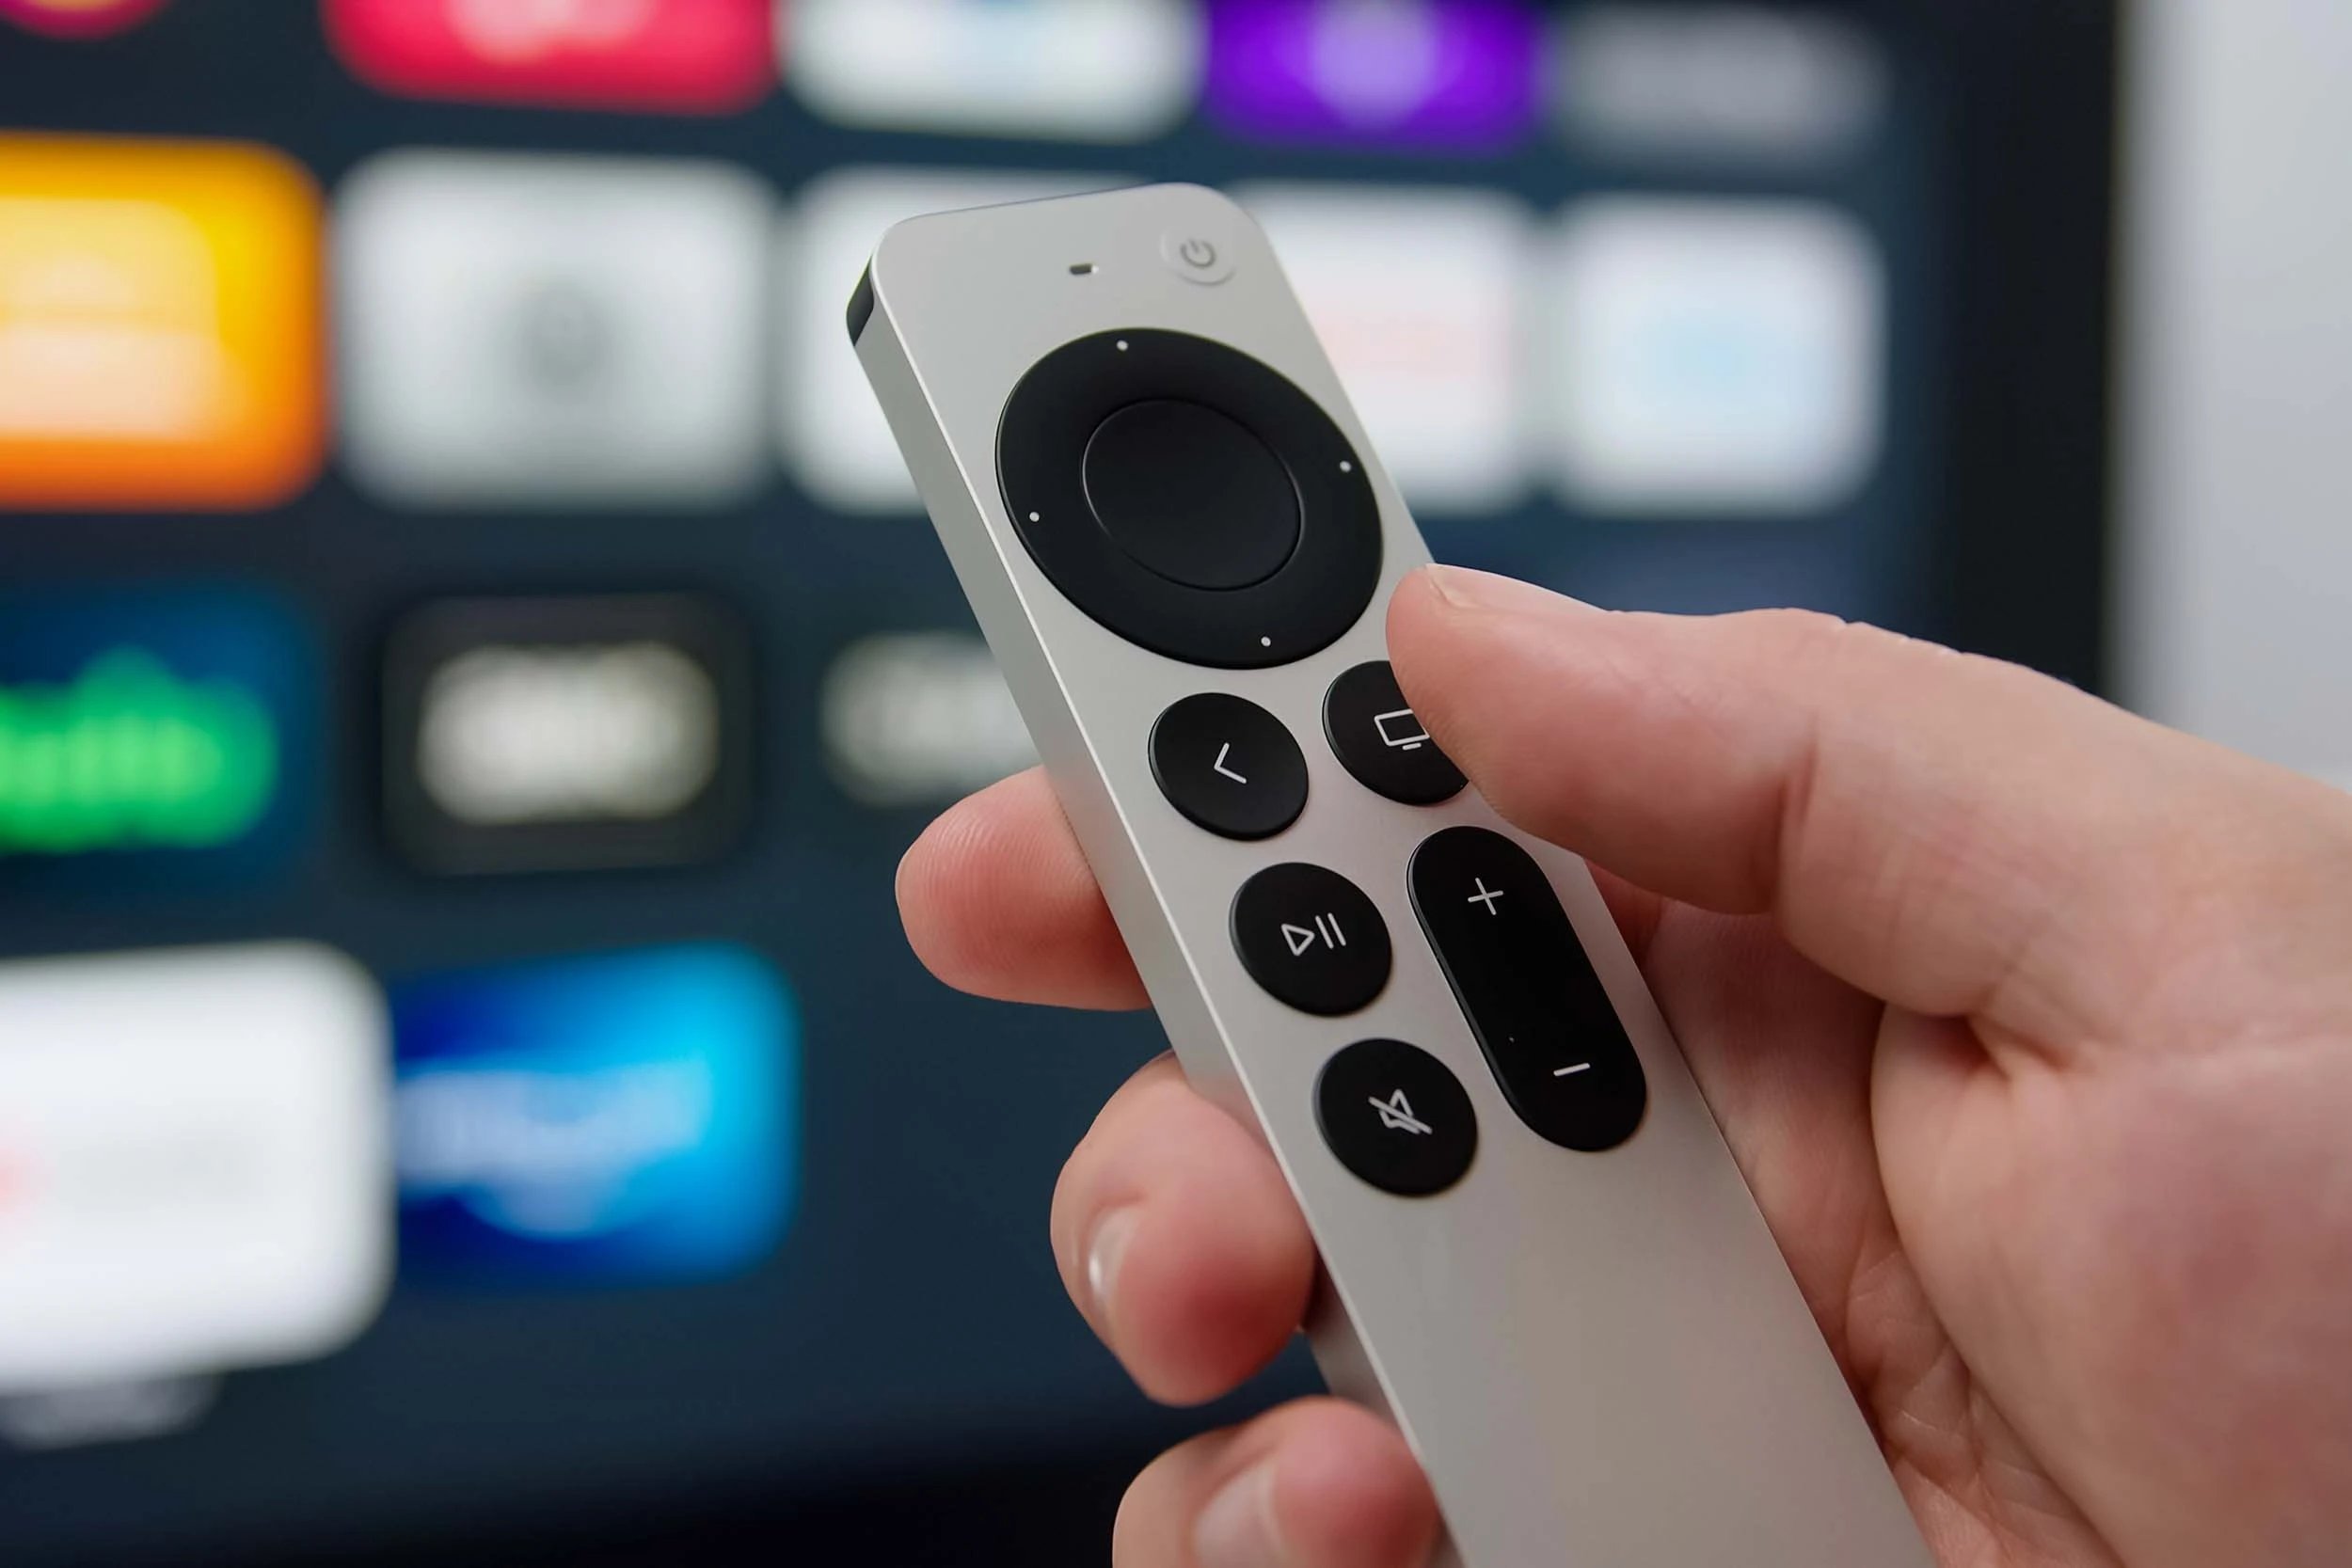 How To Use A Universal Remote With Apple TV